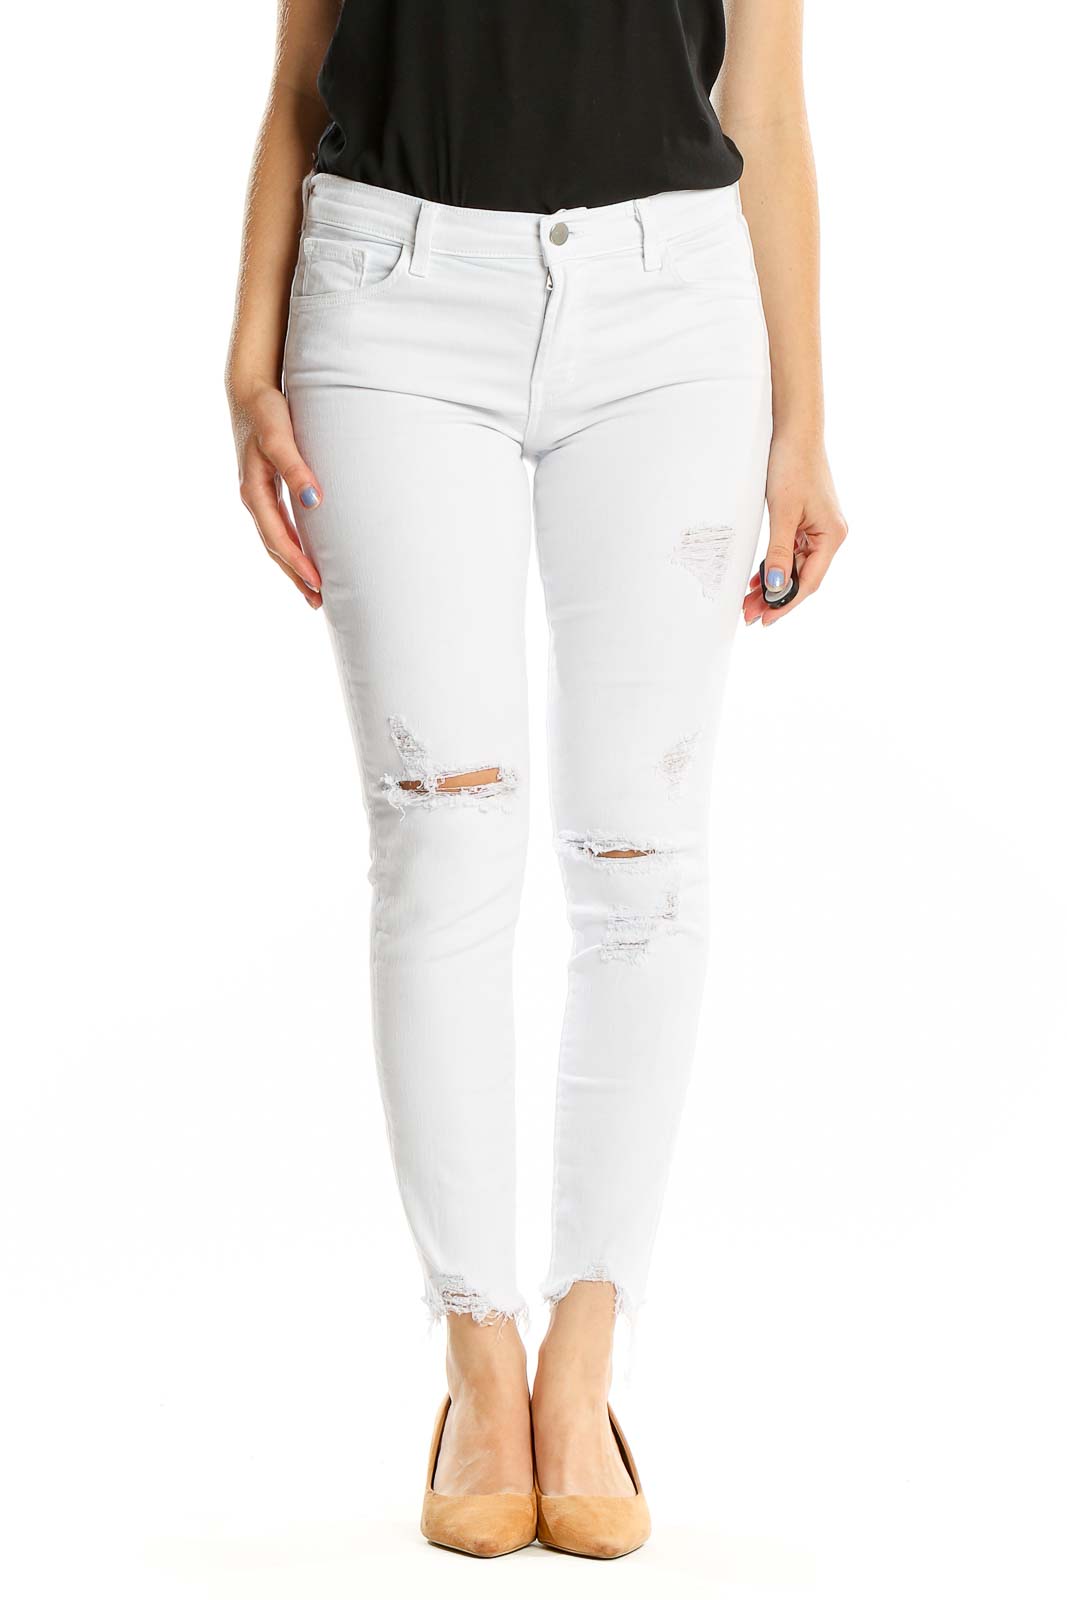 White Ripped Distressed Skinny Jeans Front